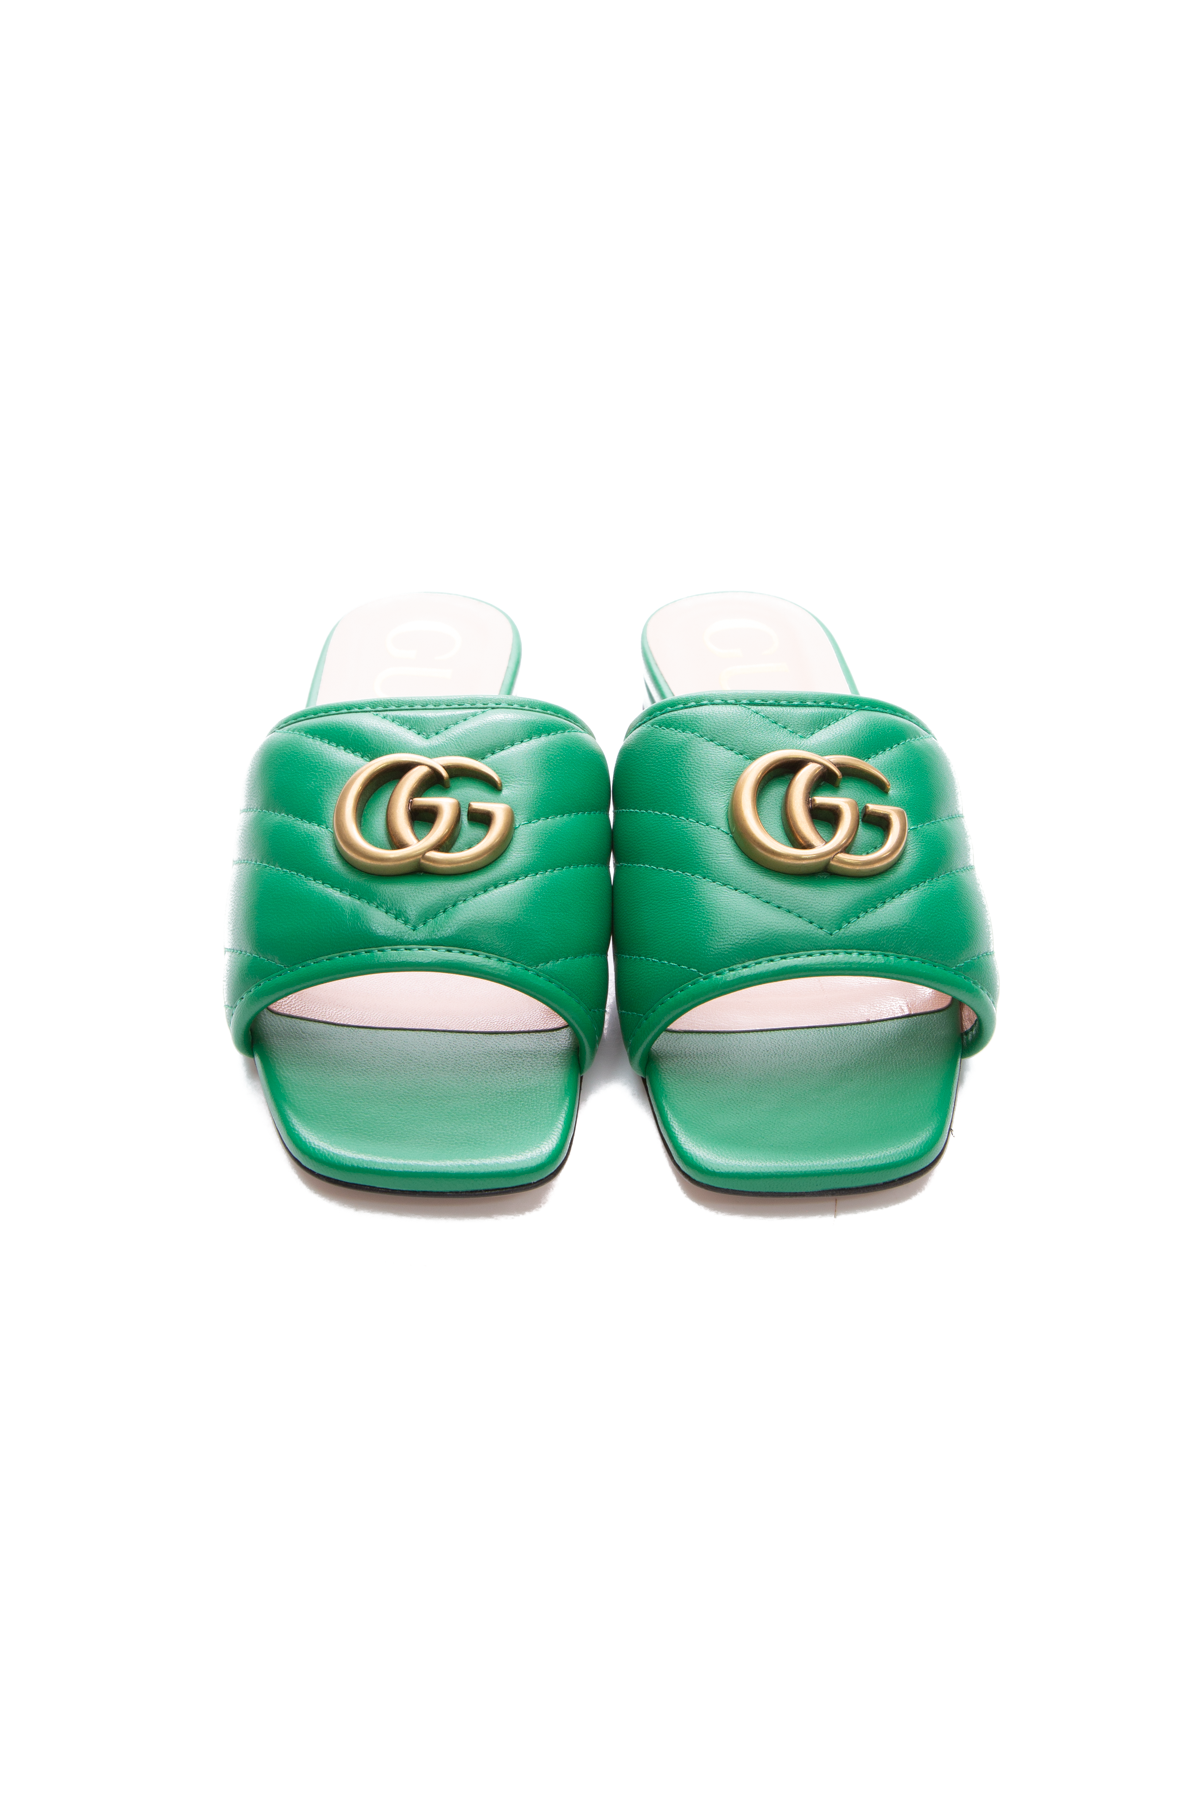 Gucci Marmont Quilted Flat Sandals - Size 35